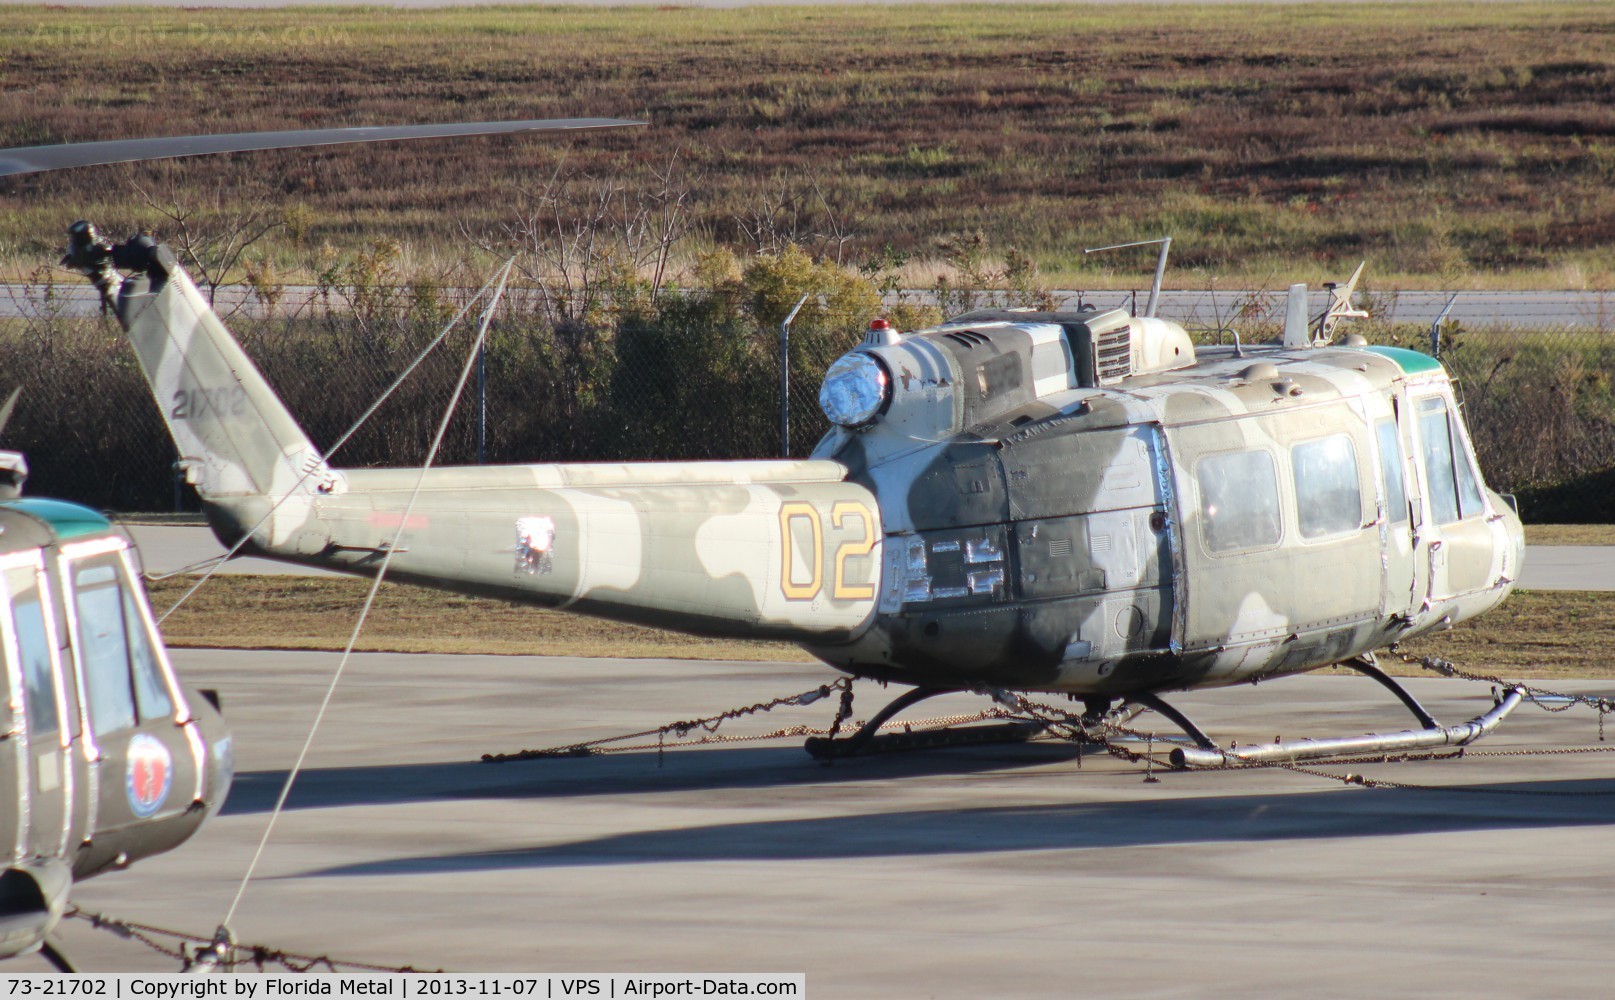 73-21702, 1973 Bell UH-1H Iroquois C/N 13390, UH-1H